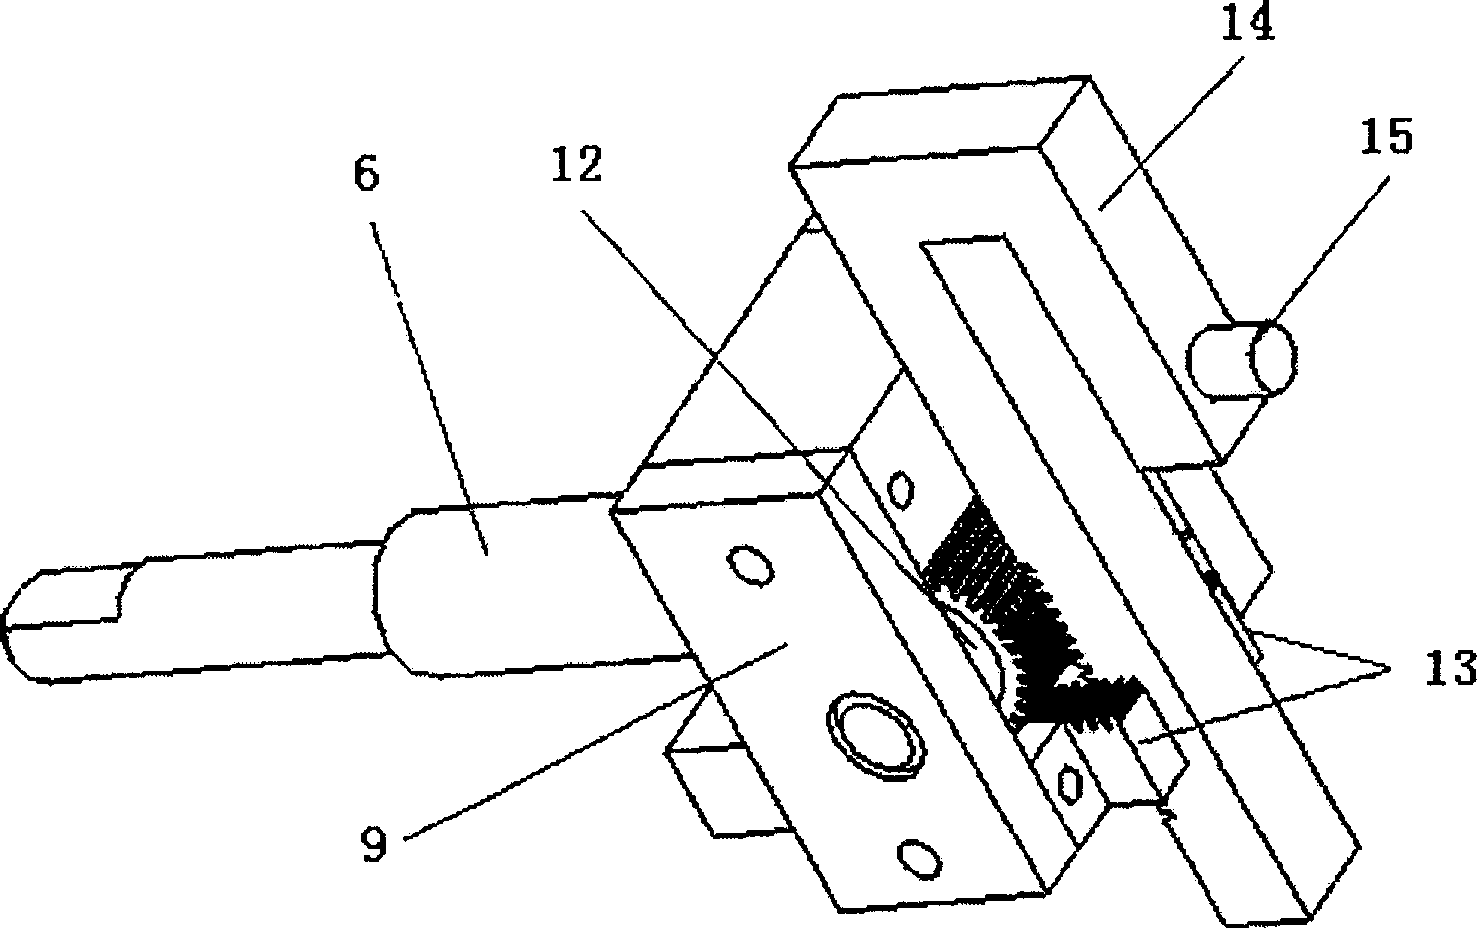 Sine driving mechanism with adjustable amplitude of oscillation for mechanical dolphin